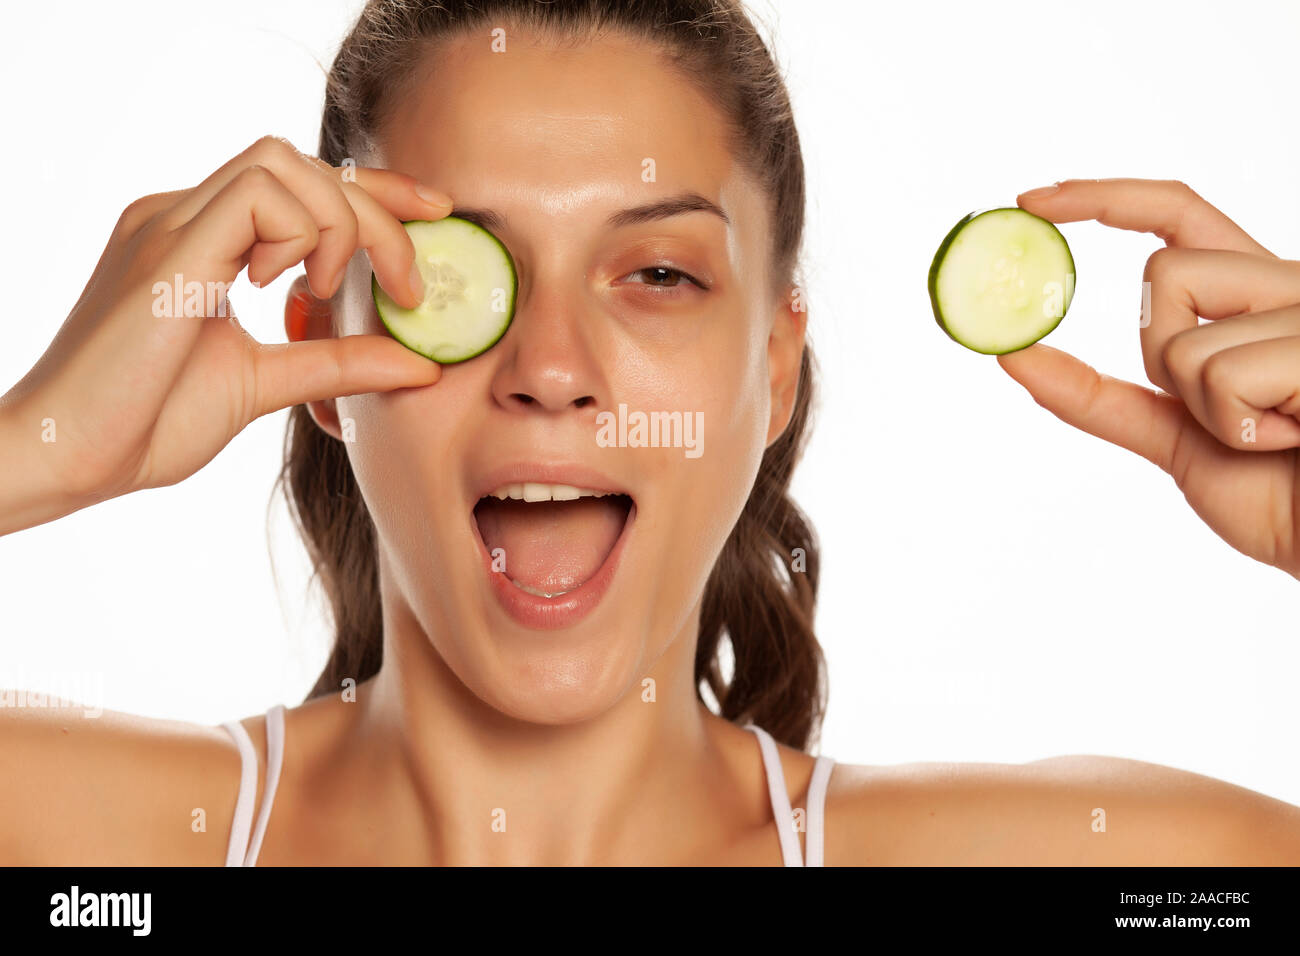 Young smiling woman posing with slices of cucumbers on her eyes on white background Stock Photo